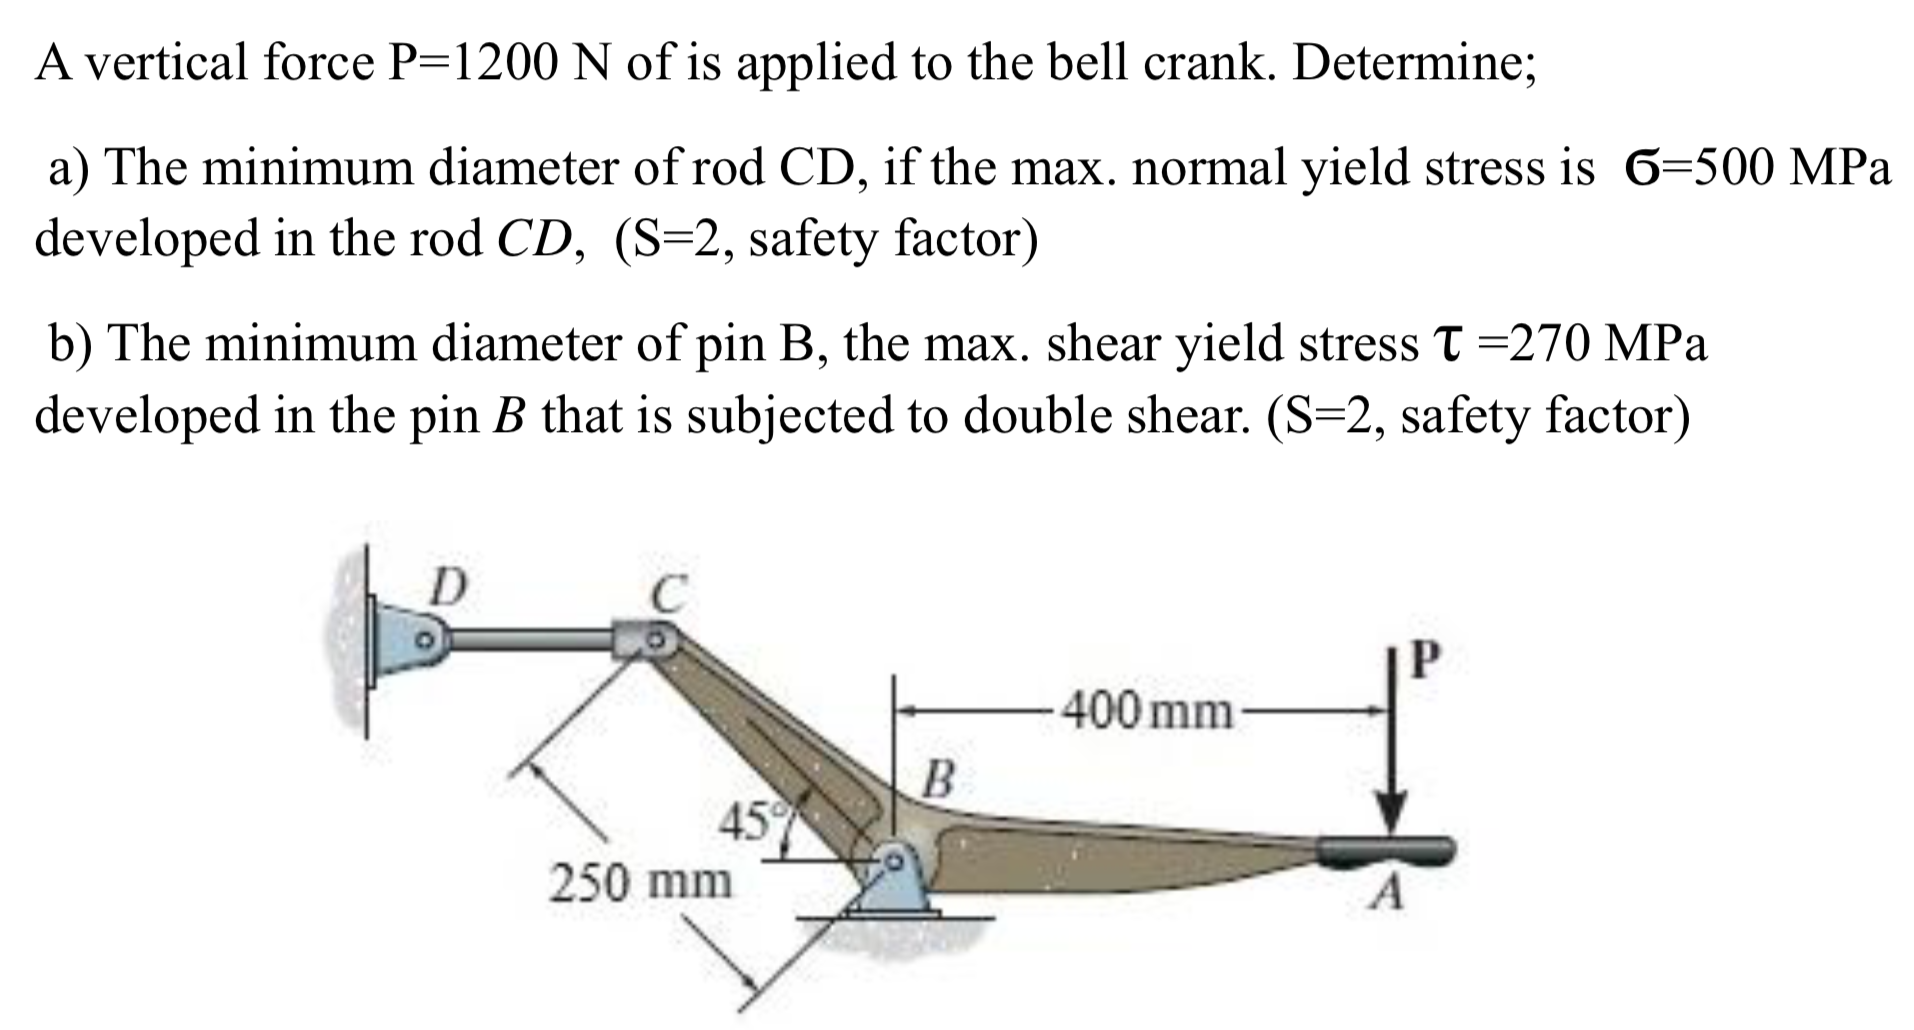 A vertical force P=1200 N of is applied to the bell crank. Determine;
a) The minimum diameter of rod CD, if the max. normal yield stress is 6=500 MPa
developed in the rod CD, (S=2, safety factor)
b) The minimum diameter of pin B, the max. shear yield stress T =270 MPa
developed in the pin B that is subjected to double shear. (S=2, safety factor)
